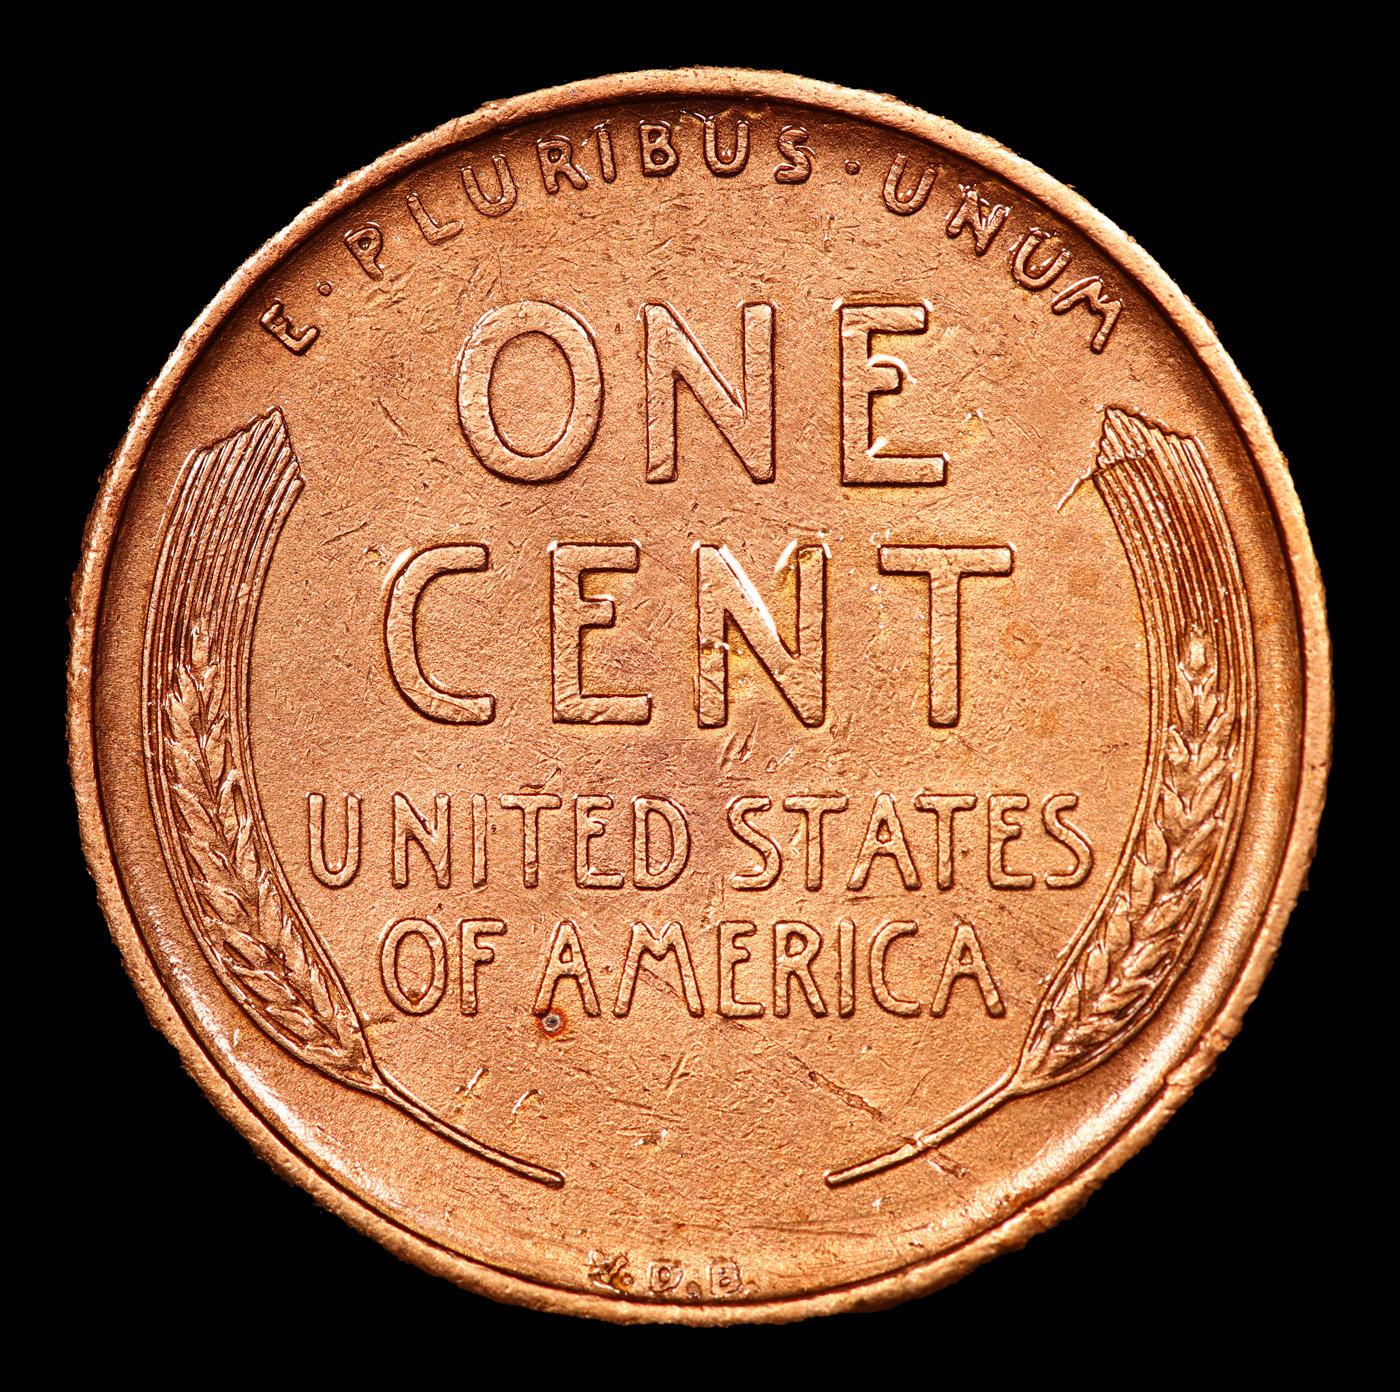 ***Auction Highlight*** 1909-s VDB Lincoln Cent 1c Graded Choice Unc RD By USCG (fc)